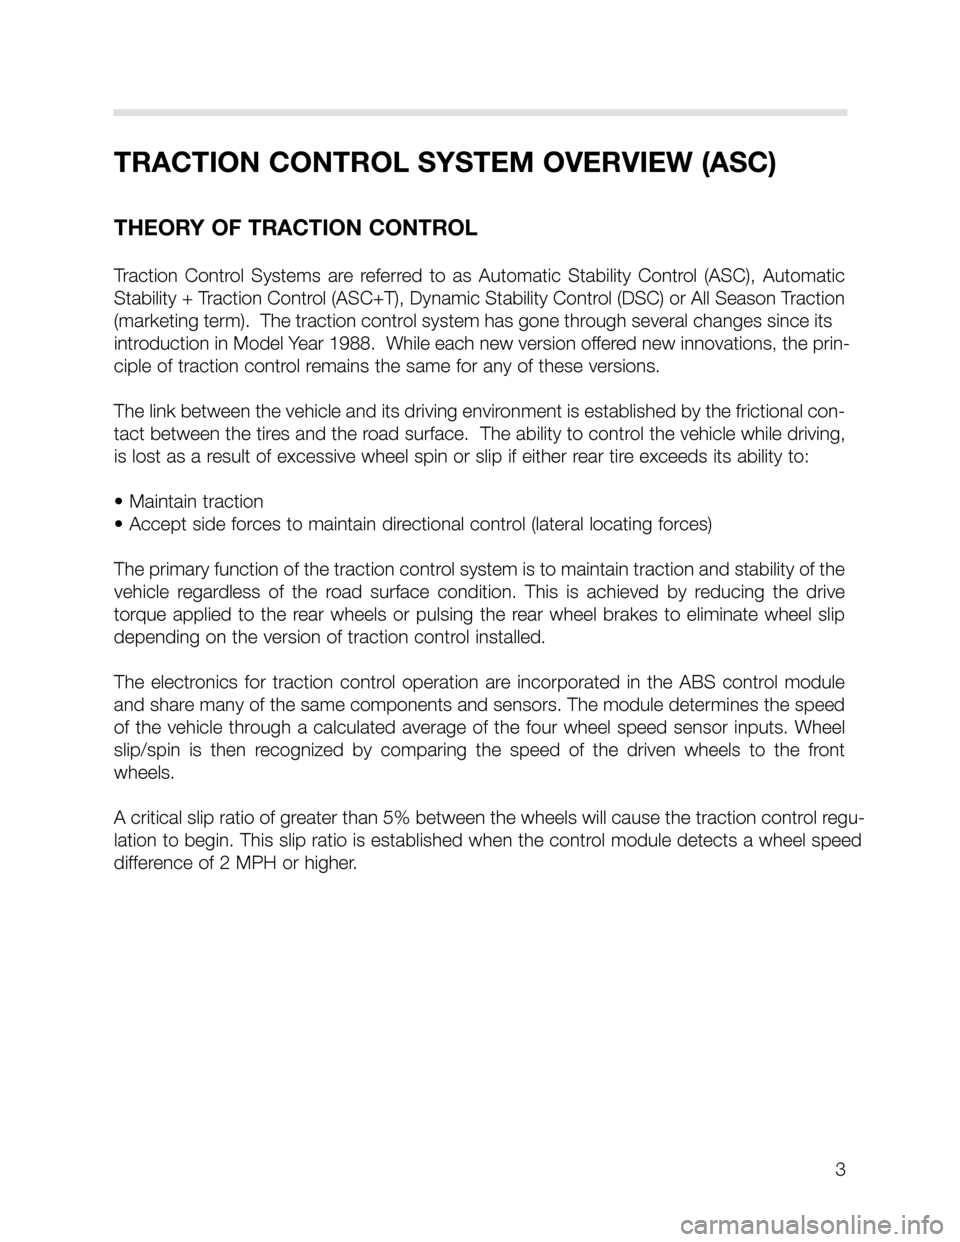 BMW X5 2000 E53 DSC System Workshop Manual 3
TRACTION CONTROL SYSTEM OVERVIEW (ASC)
THEORY OF TRACTION CONTROL
Traction  Control  Systems  are  referred  to  as  Automatic  Stability  Control  (ASC),  Automatic
Stability + Traction Control (AS